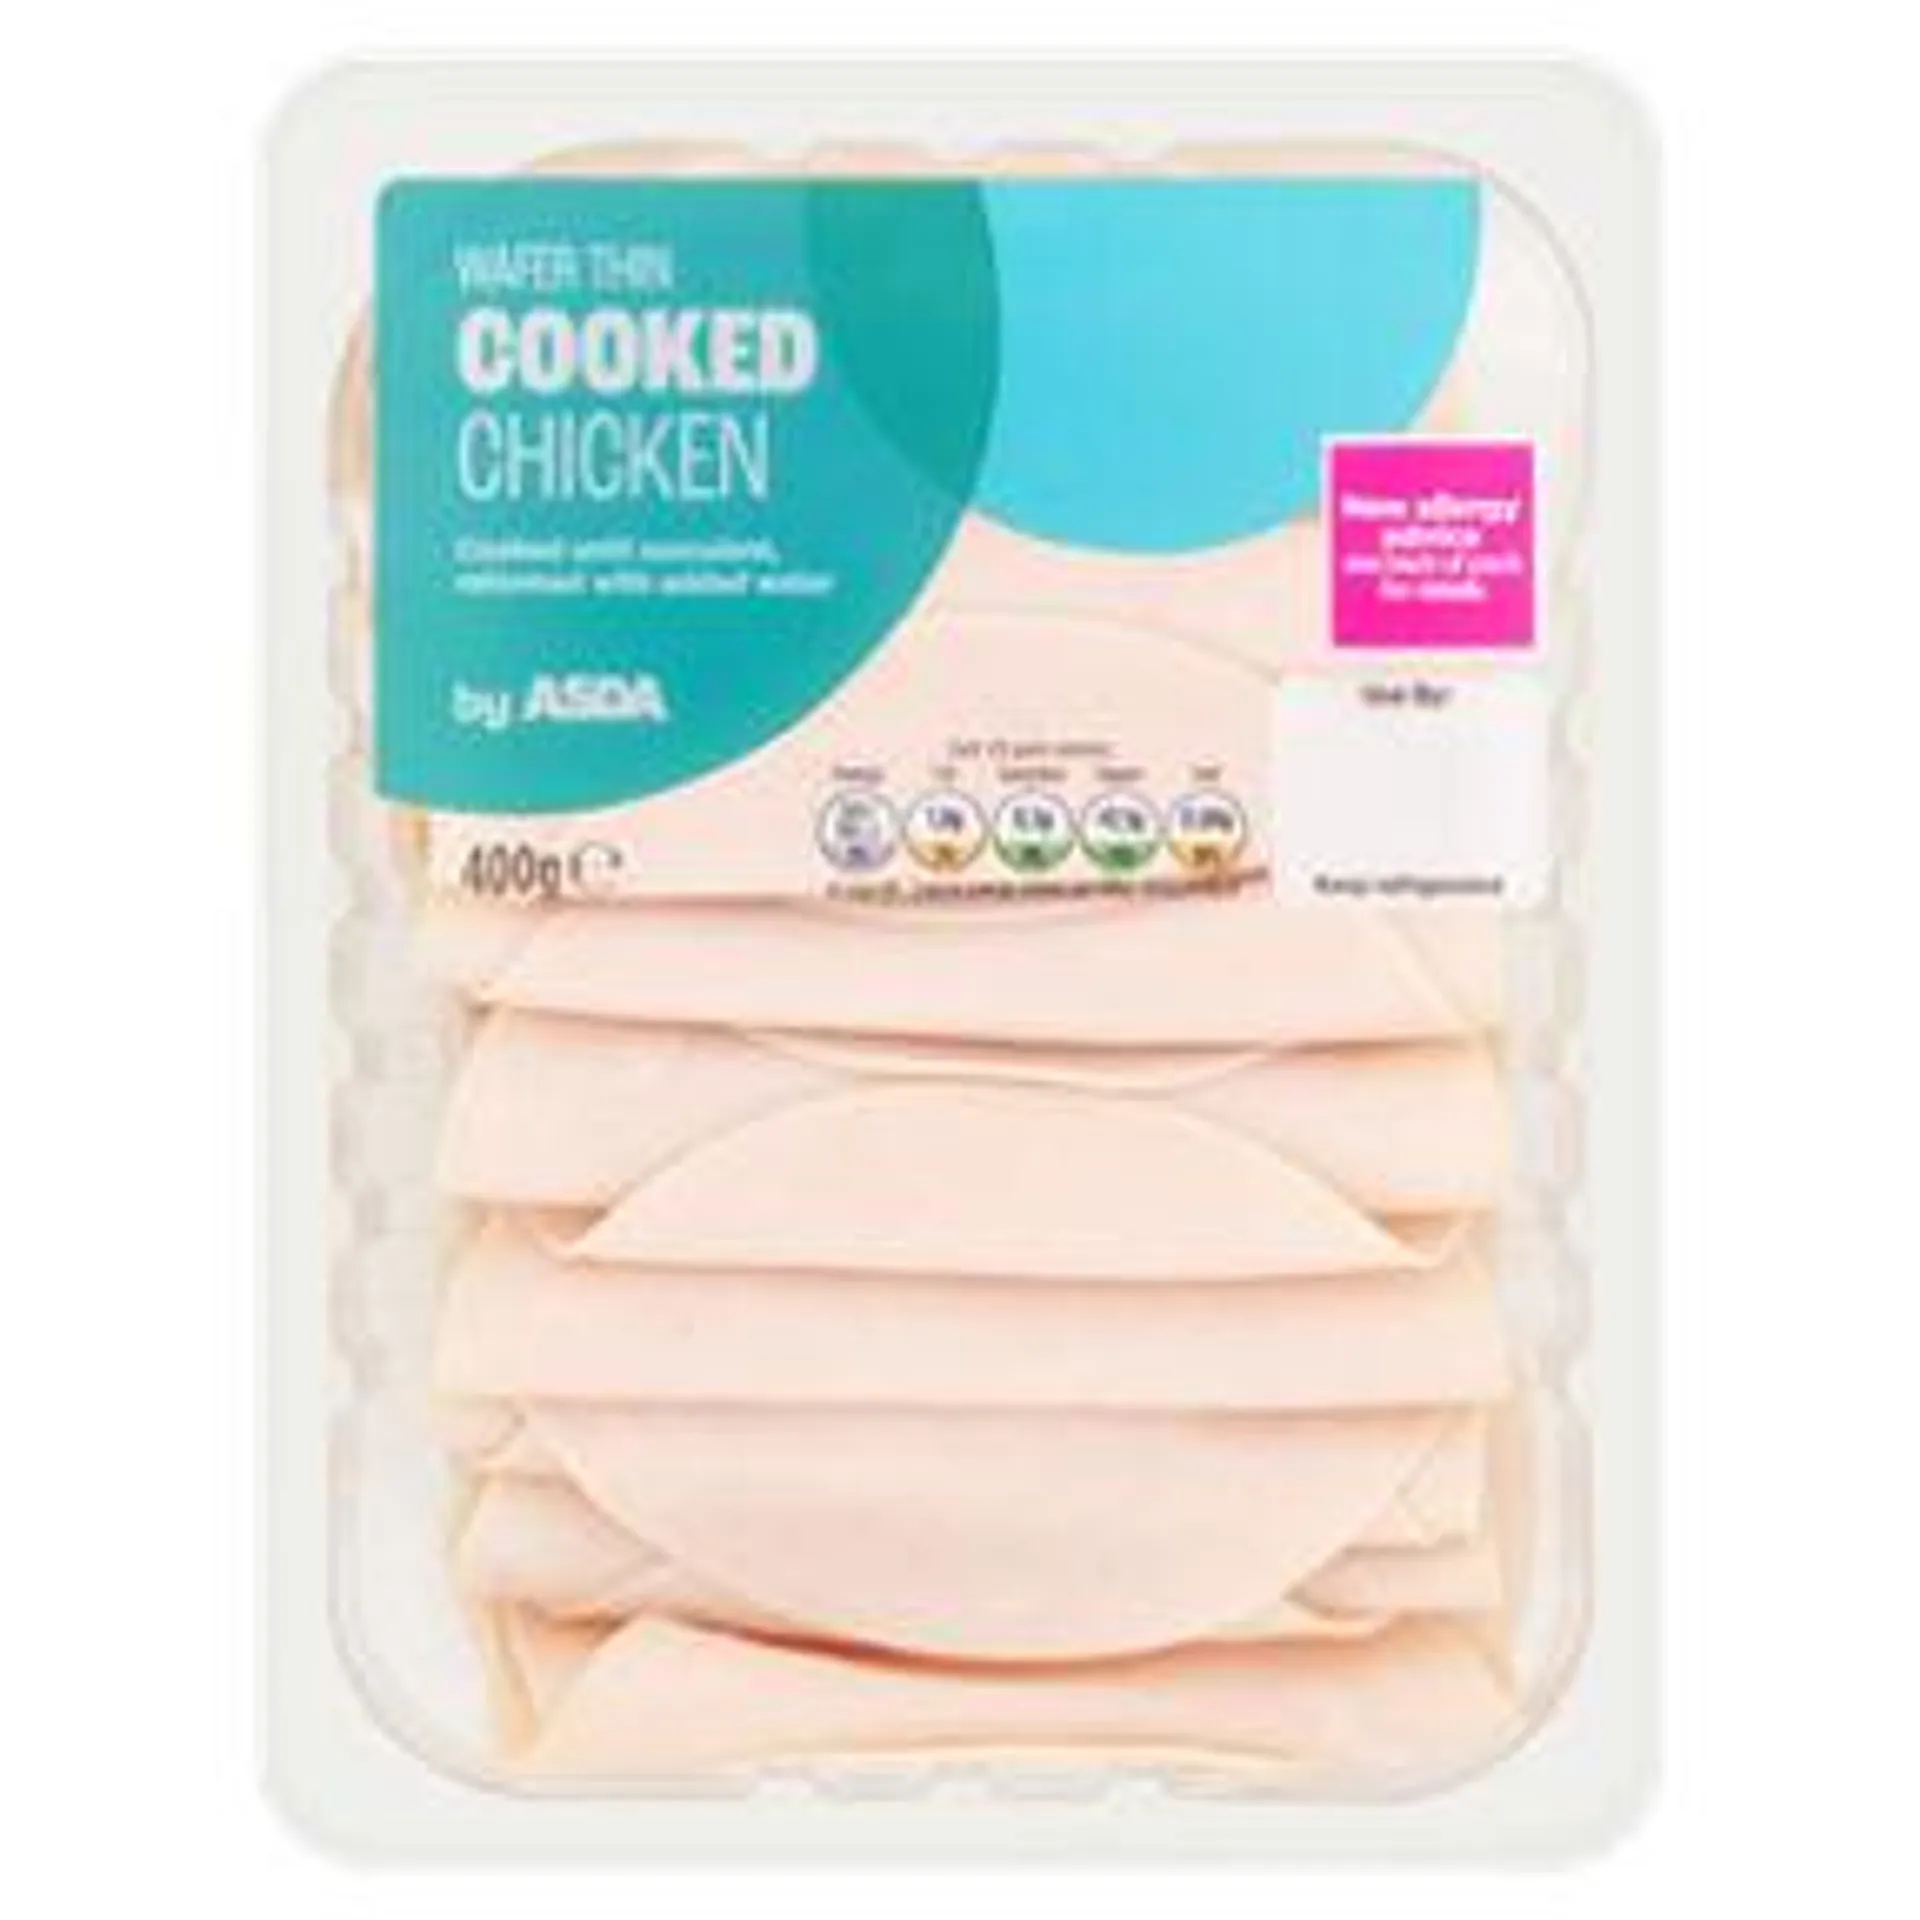 ASDA Wafer Thin Cooked Chicken Approx 40 Slices